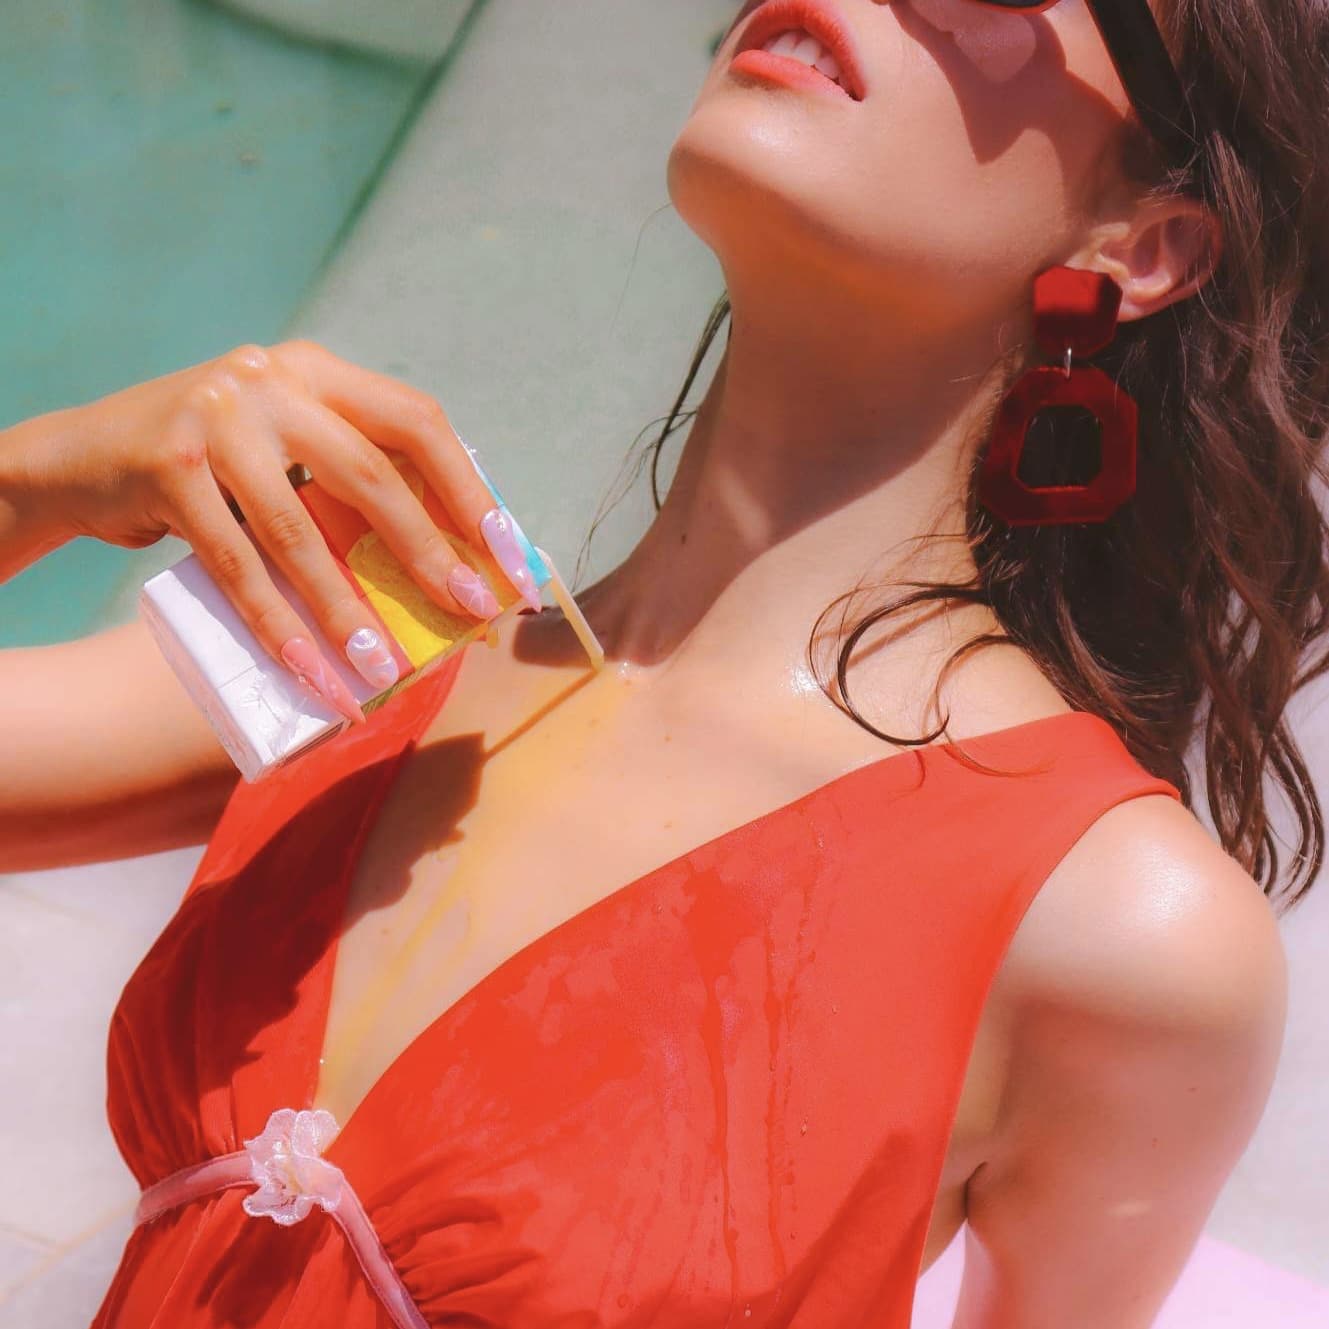 A faceless woman in a 70's style red dress pours orange juice over herself.